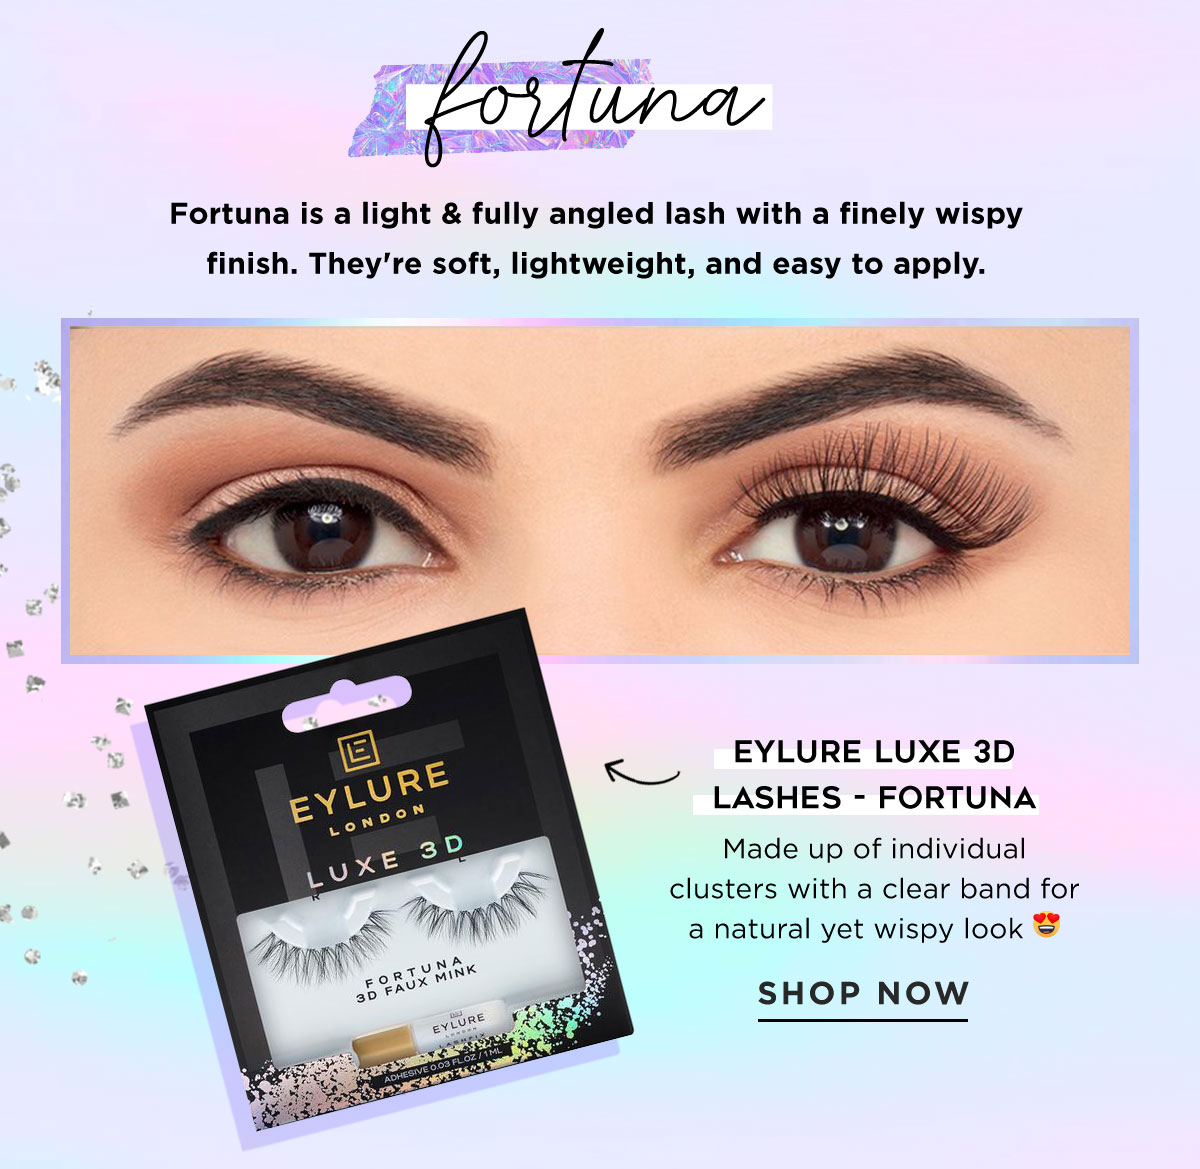 EYLURE LUXE 3D LASHES - FORTUNA